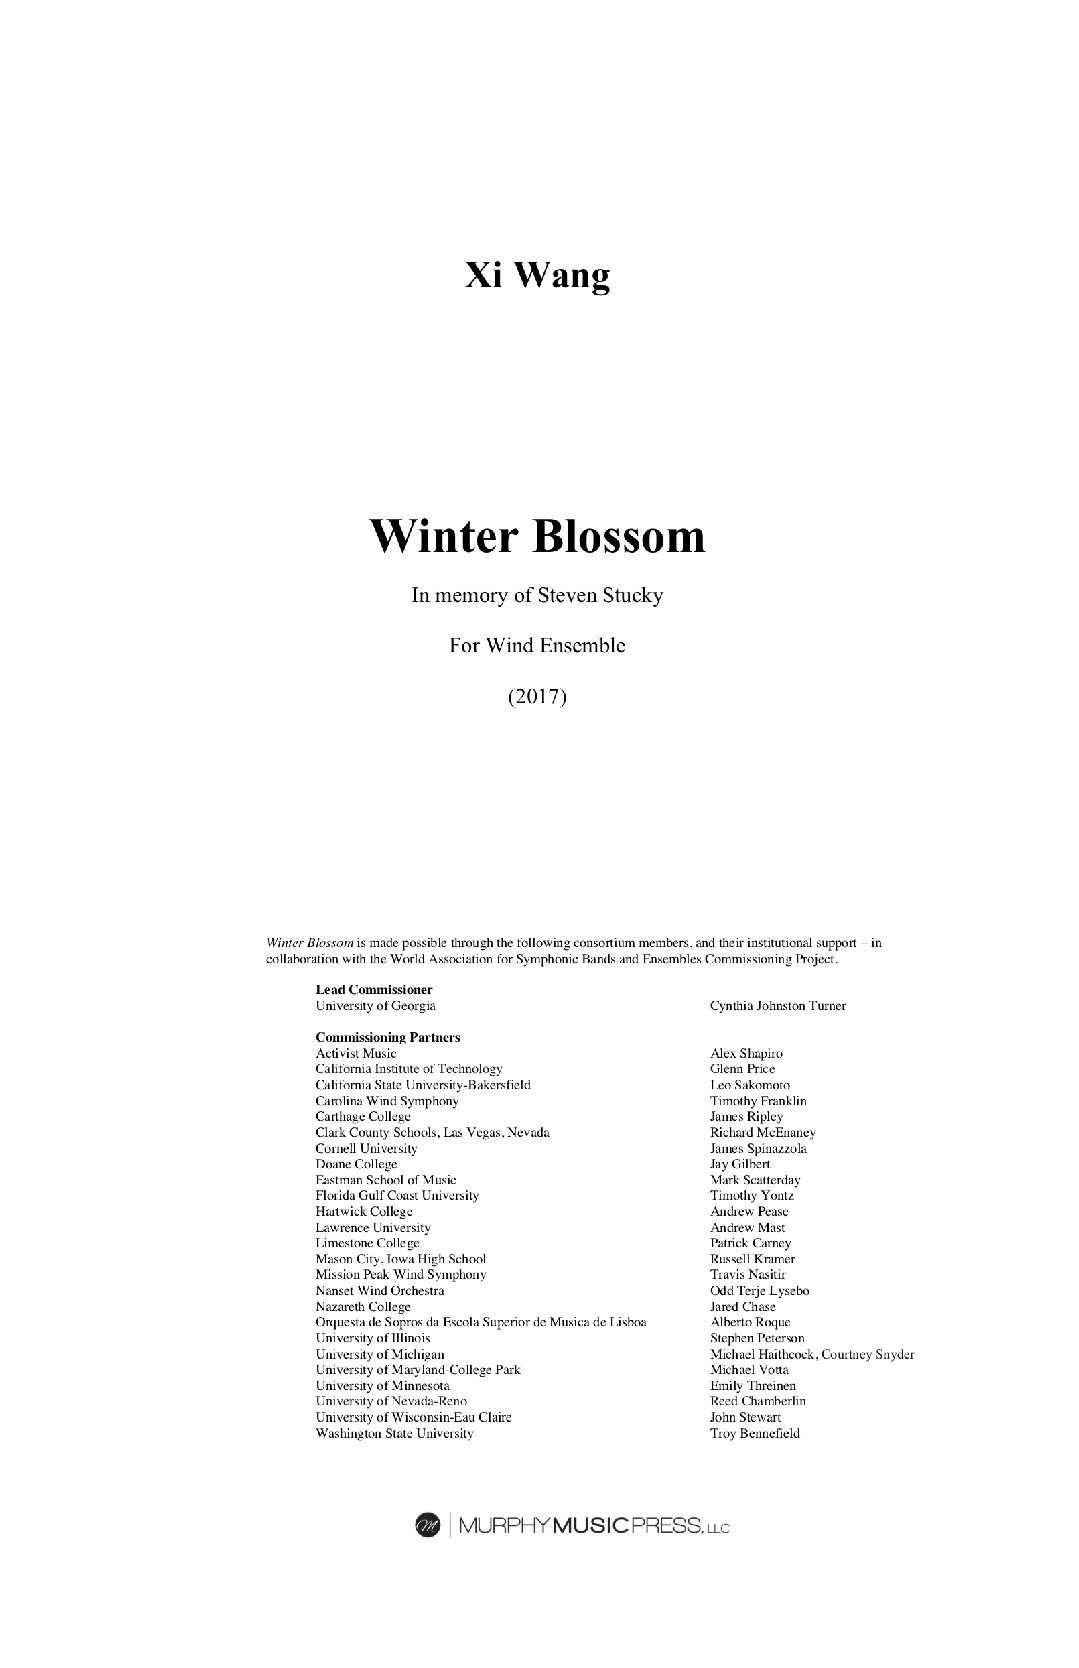 Winter Blossom (PDF Parts Rental Only) by Xi Wang